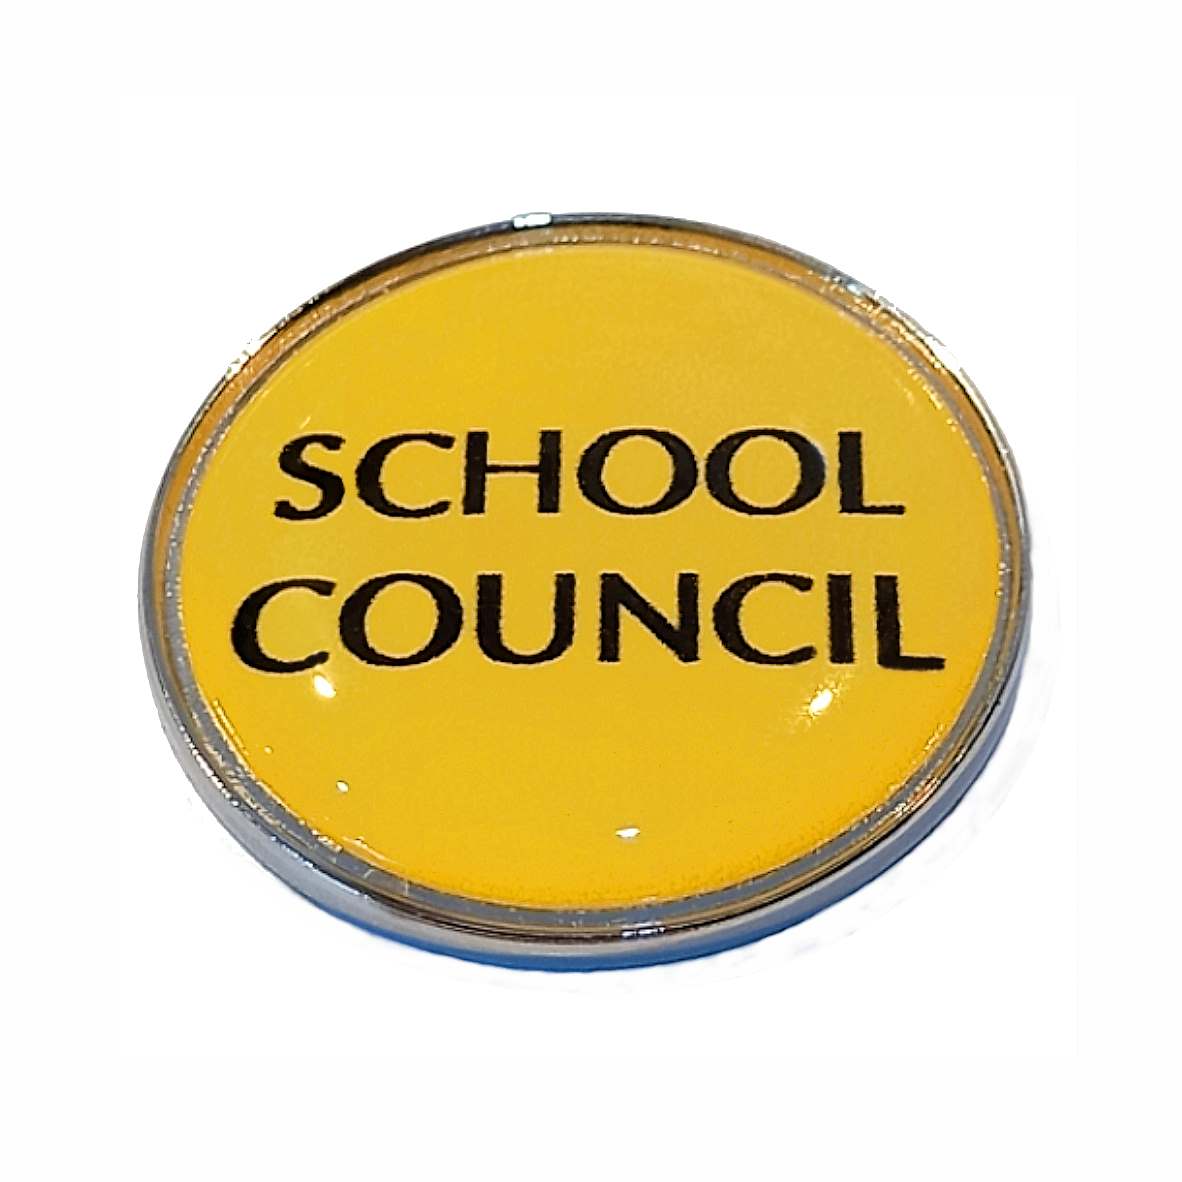 SCHOOL COUNCIL round YELLOW